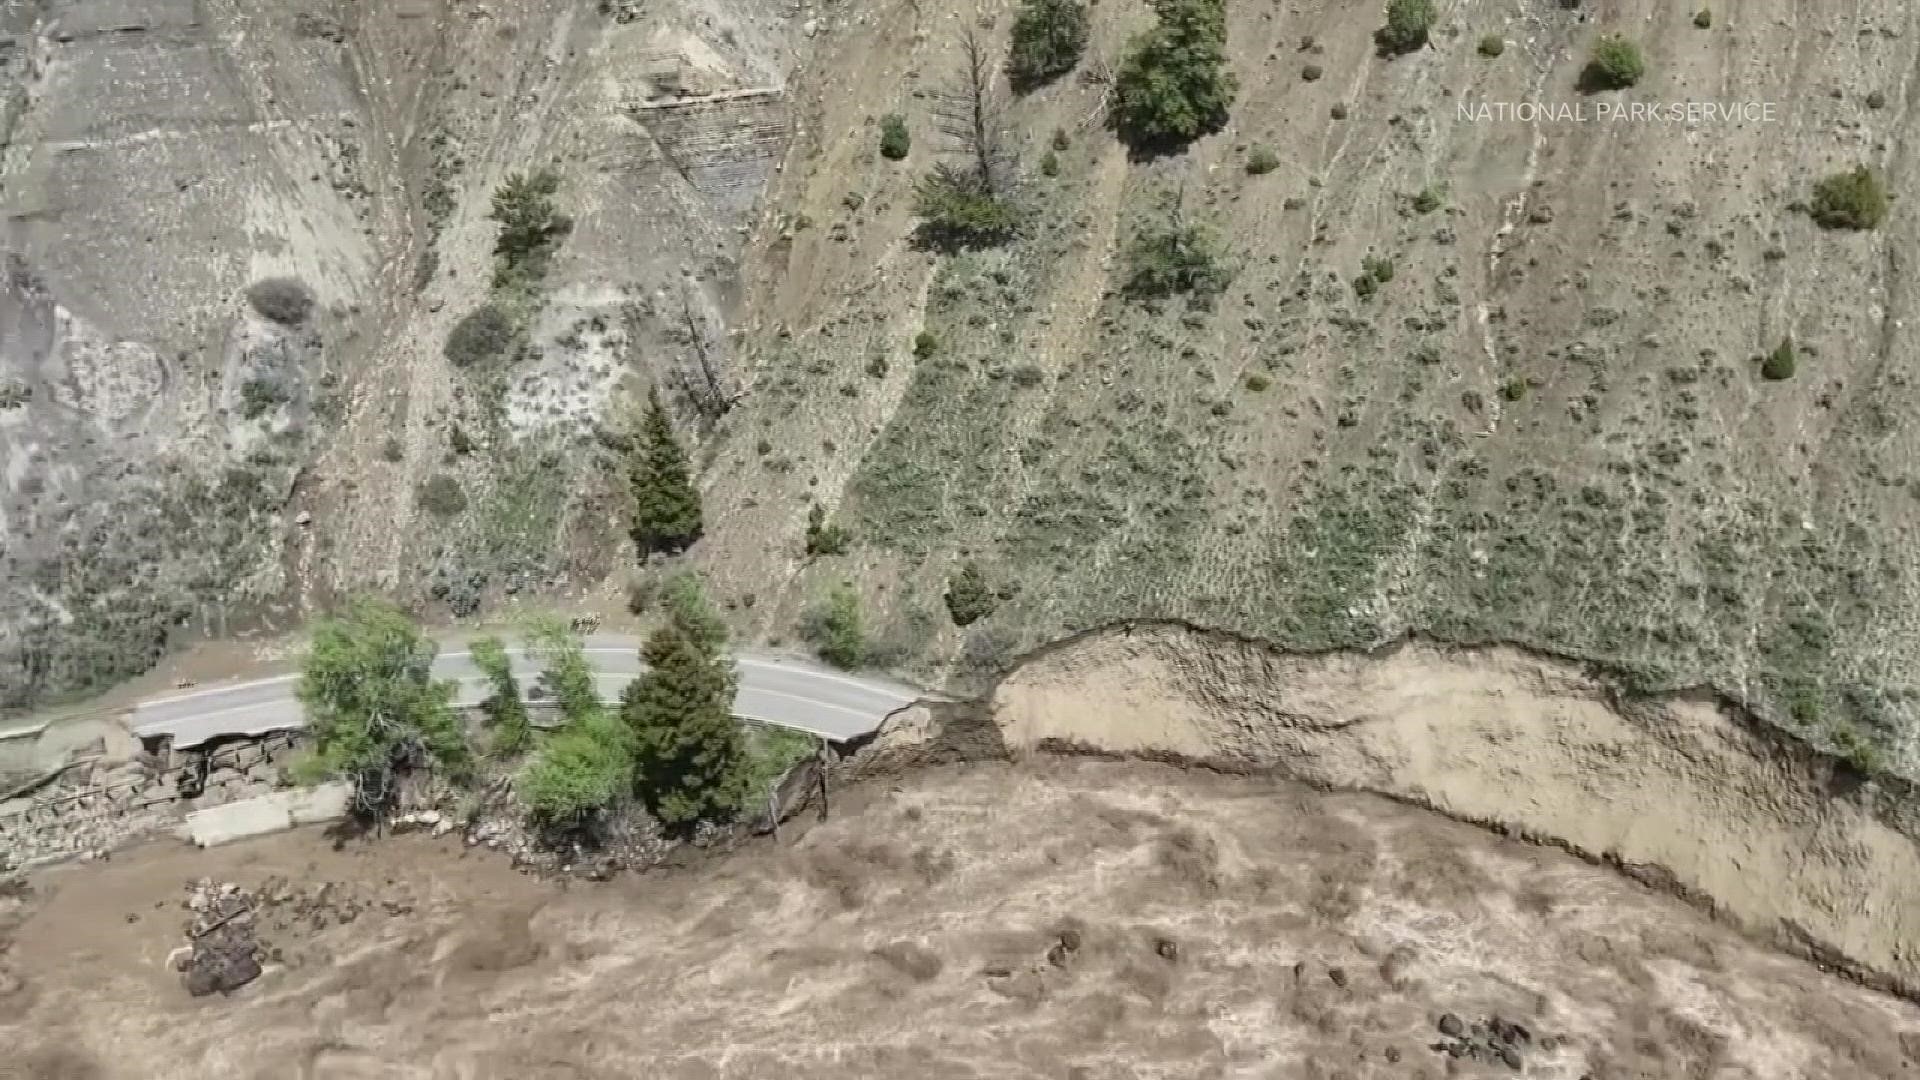 National Park Service helicopter video shows flooding damage on the road between Mammoth Hot Springs and Gardiner, Montana.